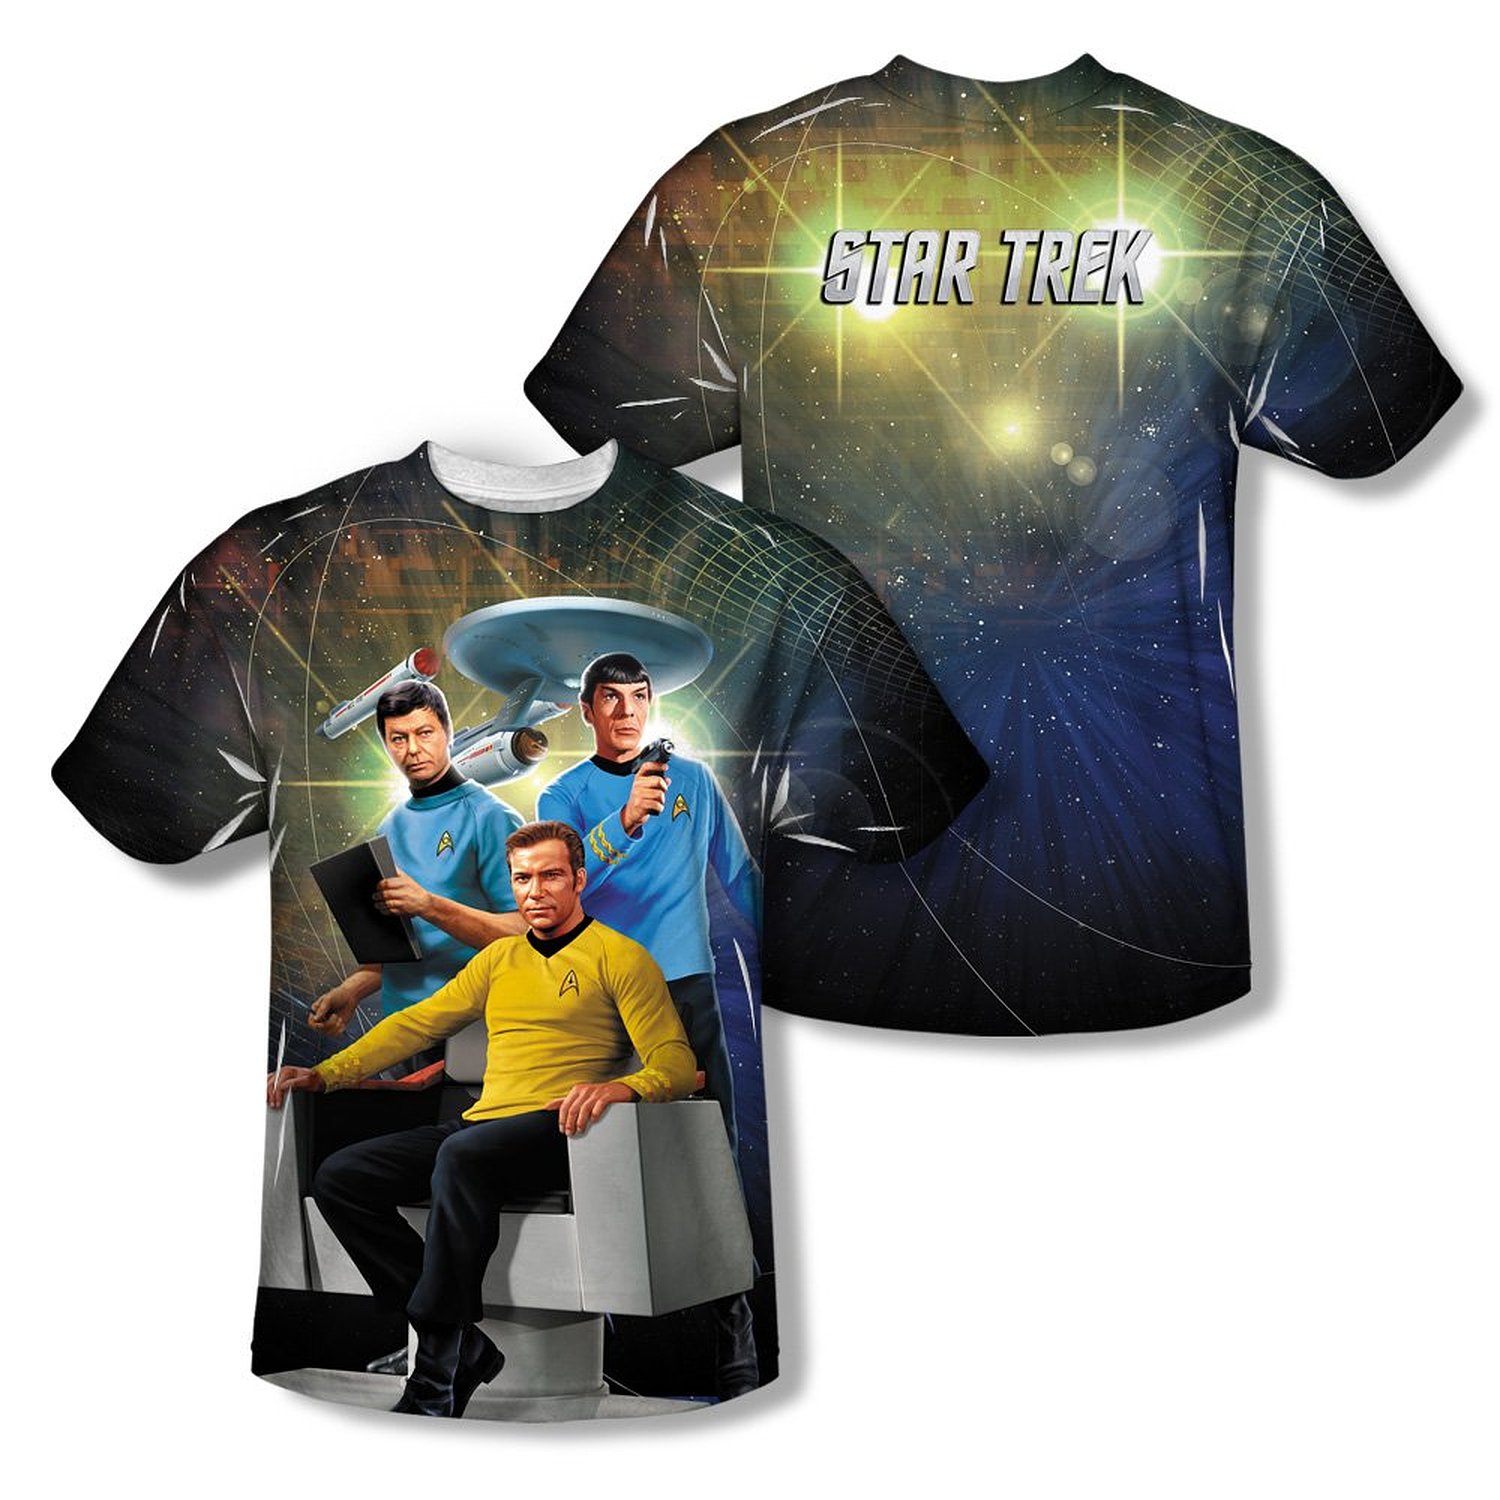 Trek T-shirts sublimation Collective: Haynes TNG, TOS, The awesome Manual more and on images